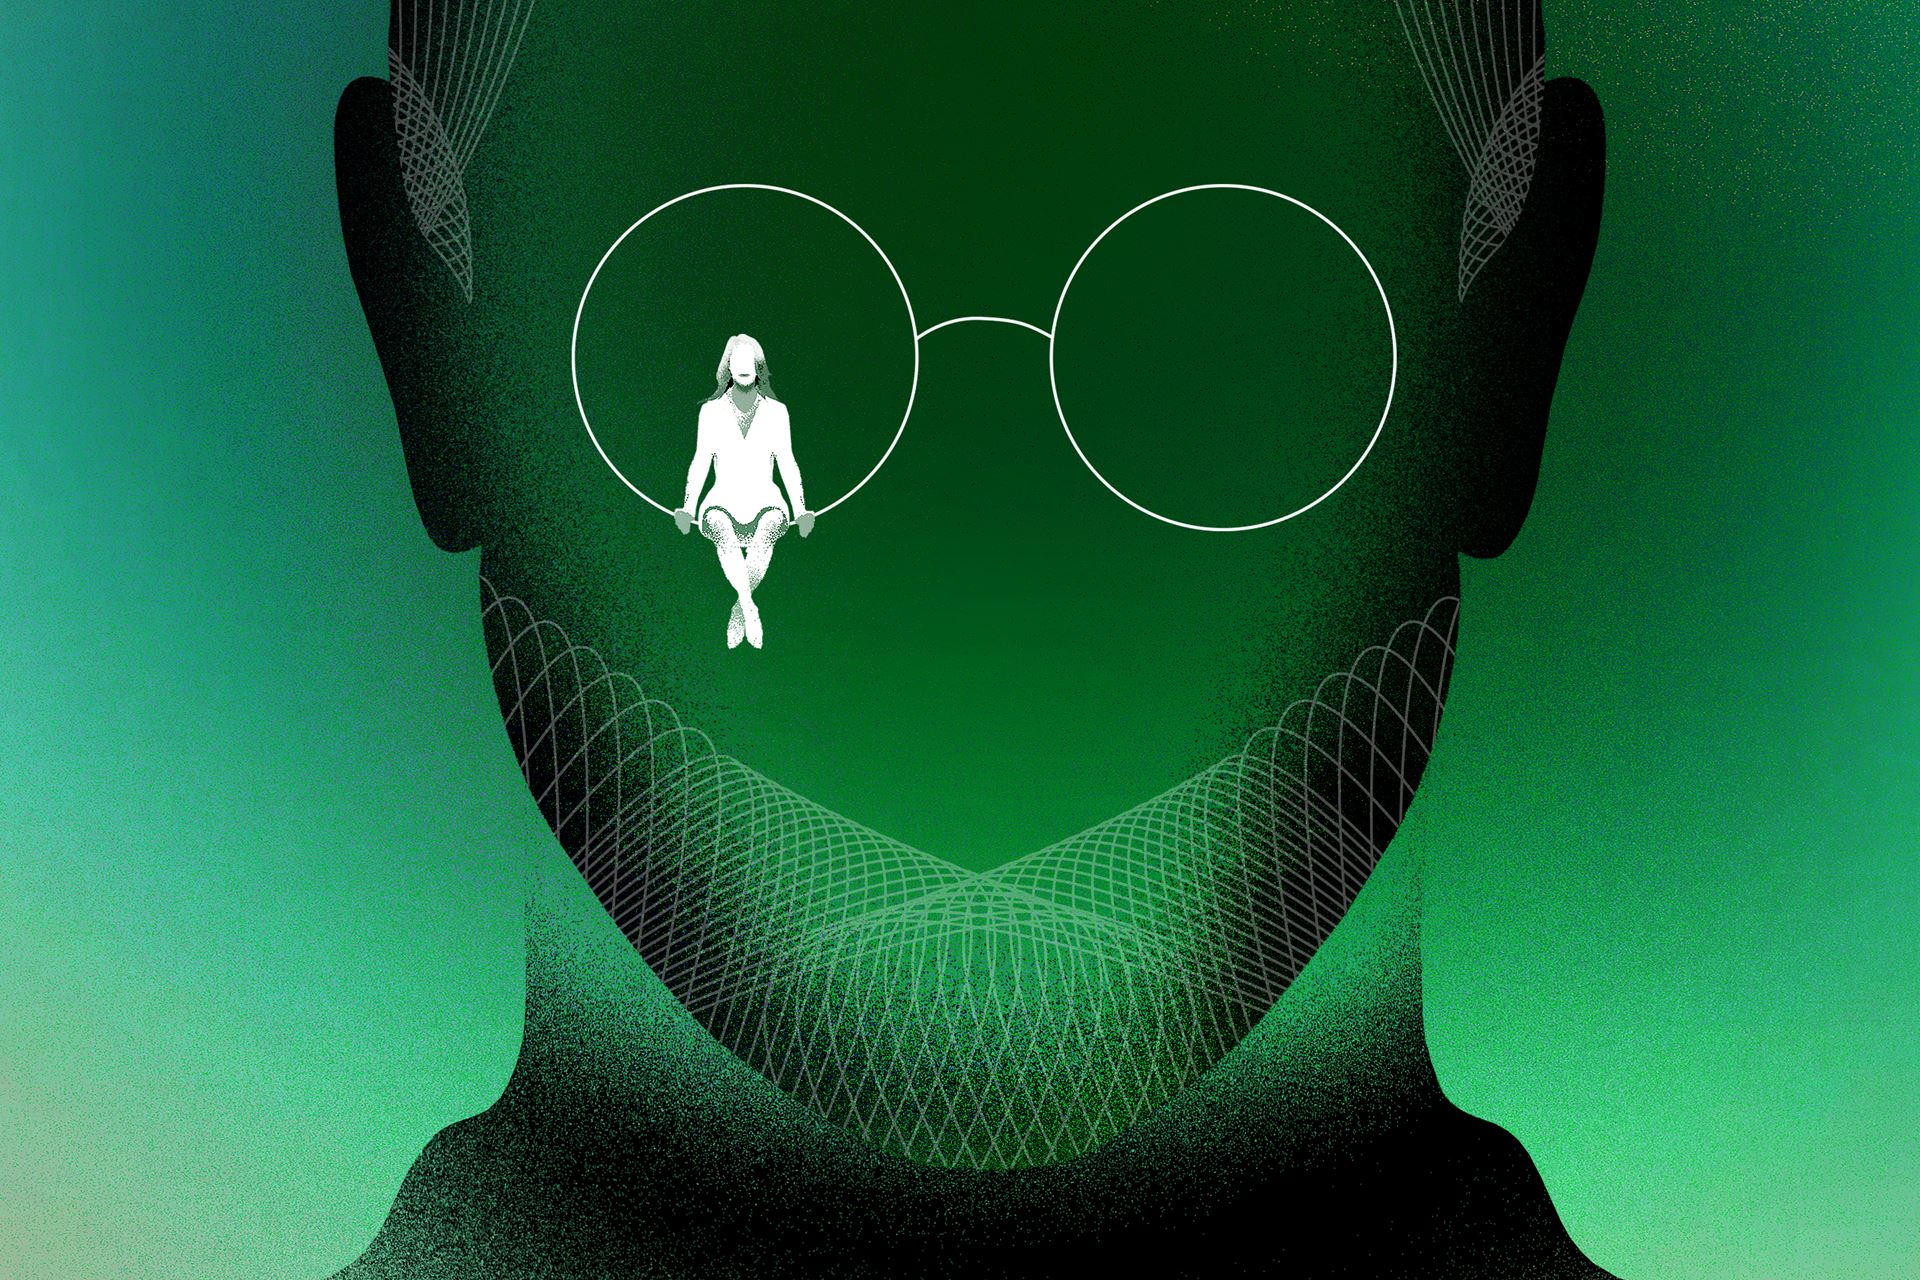 Digital green outline of Steve Jobs with silhouette of a woman sitting on the rim of the glasses